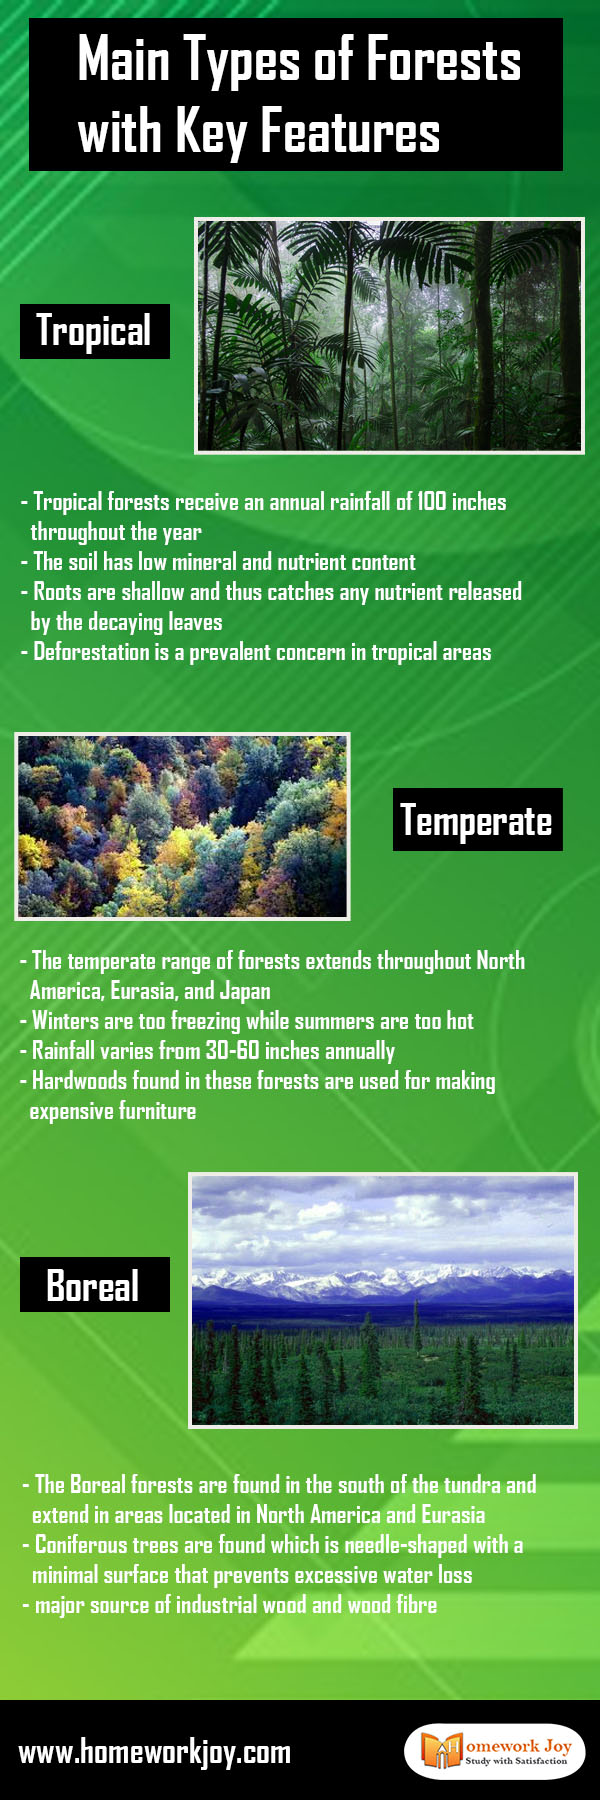 Main Types of Forests with Key Features